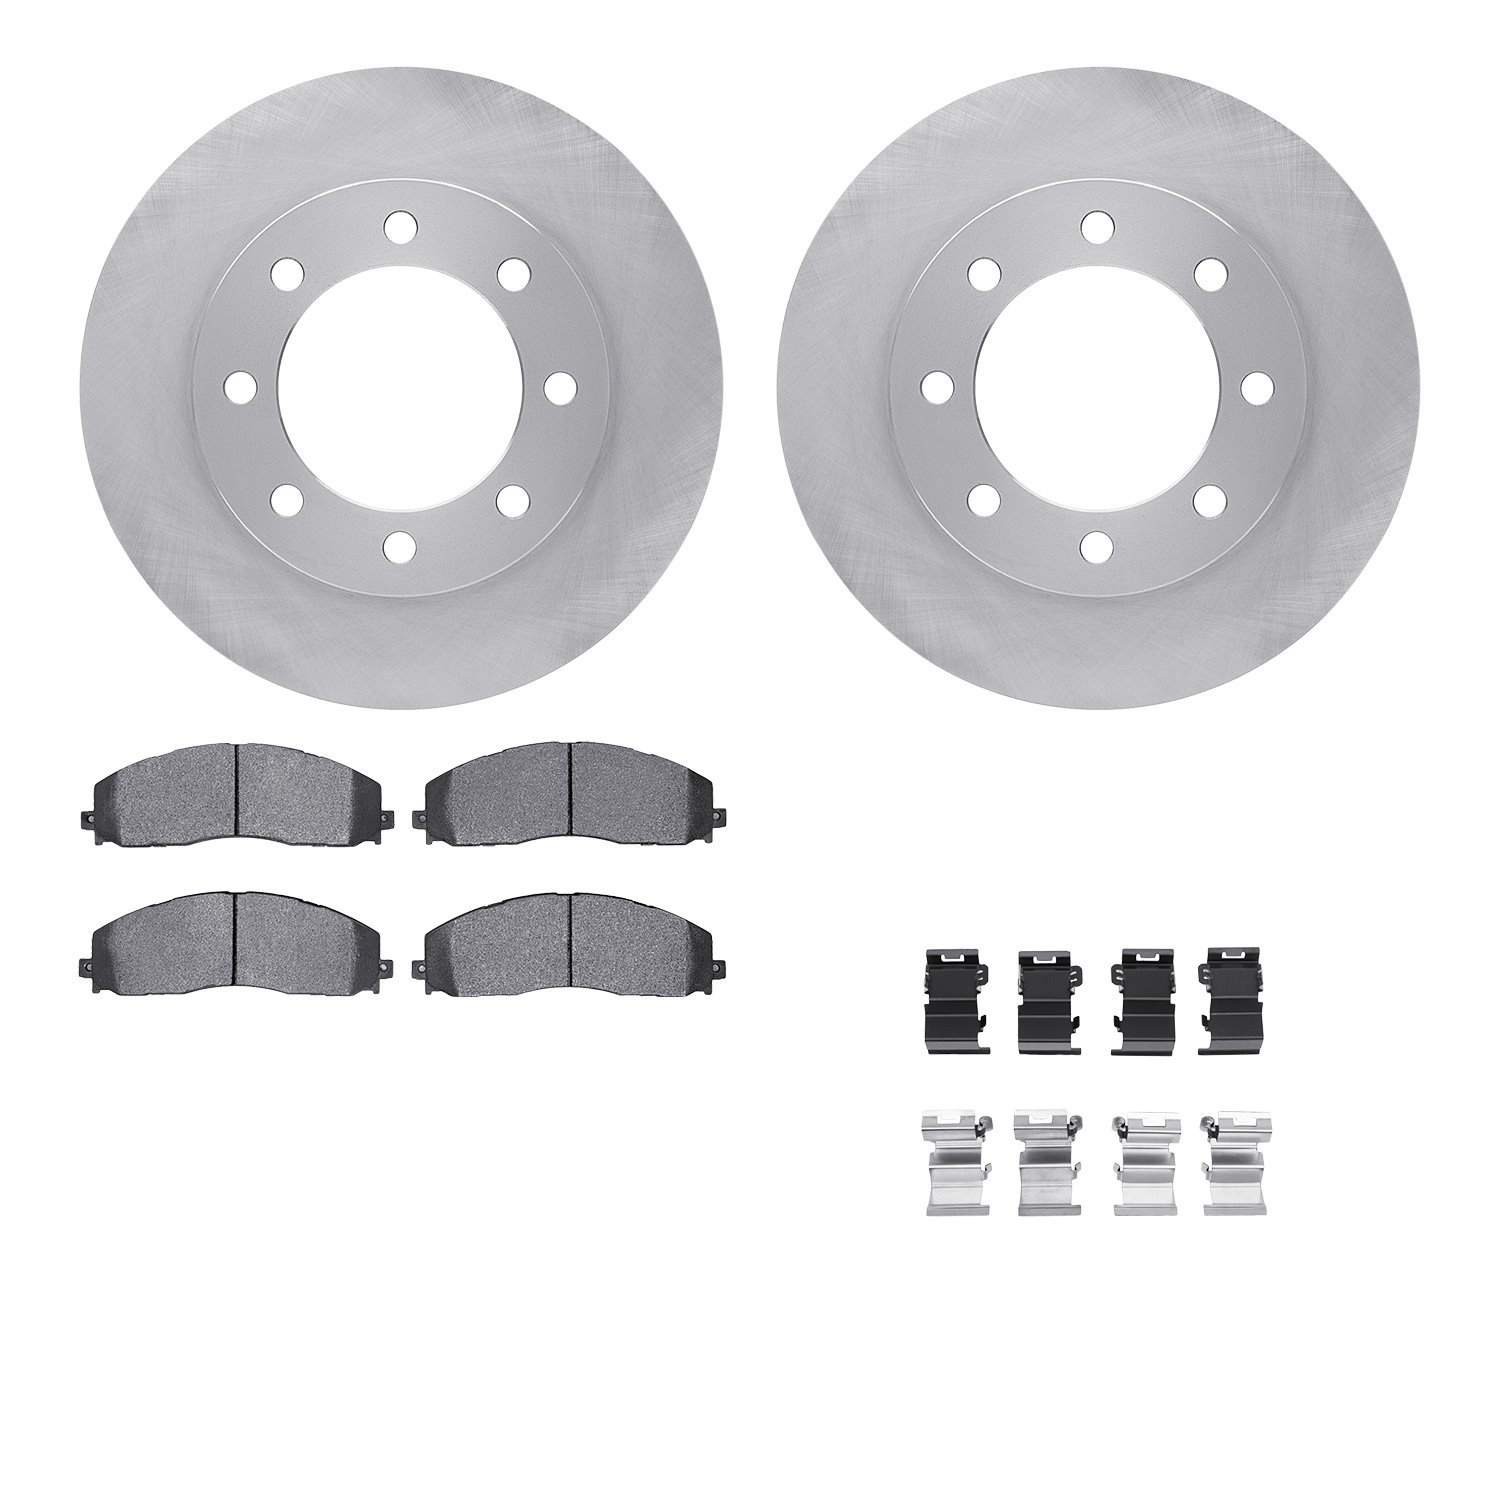 6212-99702 Brake Rotors w/Heavy-Duty Brake Pads Kit & Hardware, Fits Select Ford/Lincoln/Mercury/Mazda, Position: Front